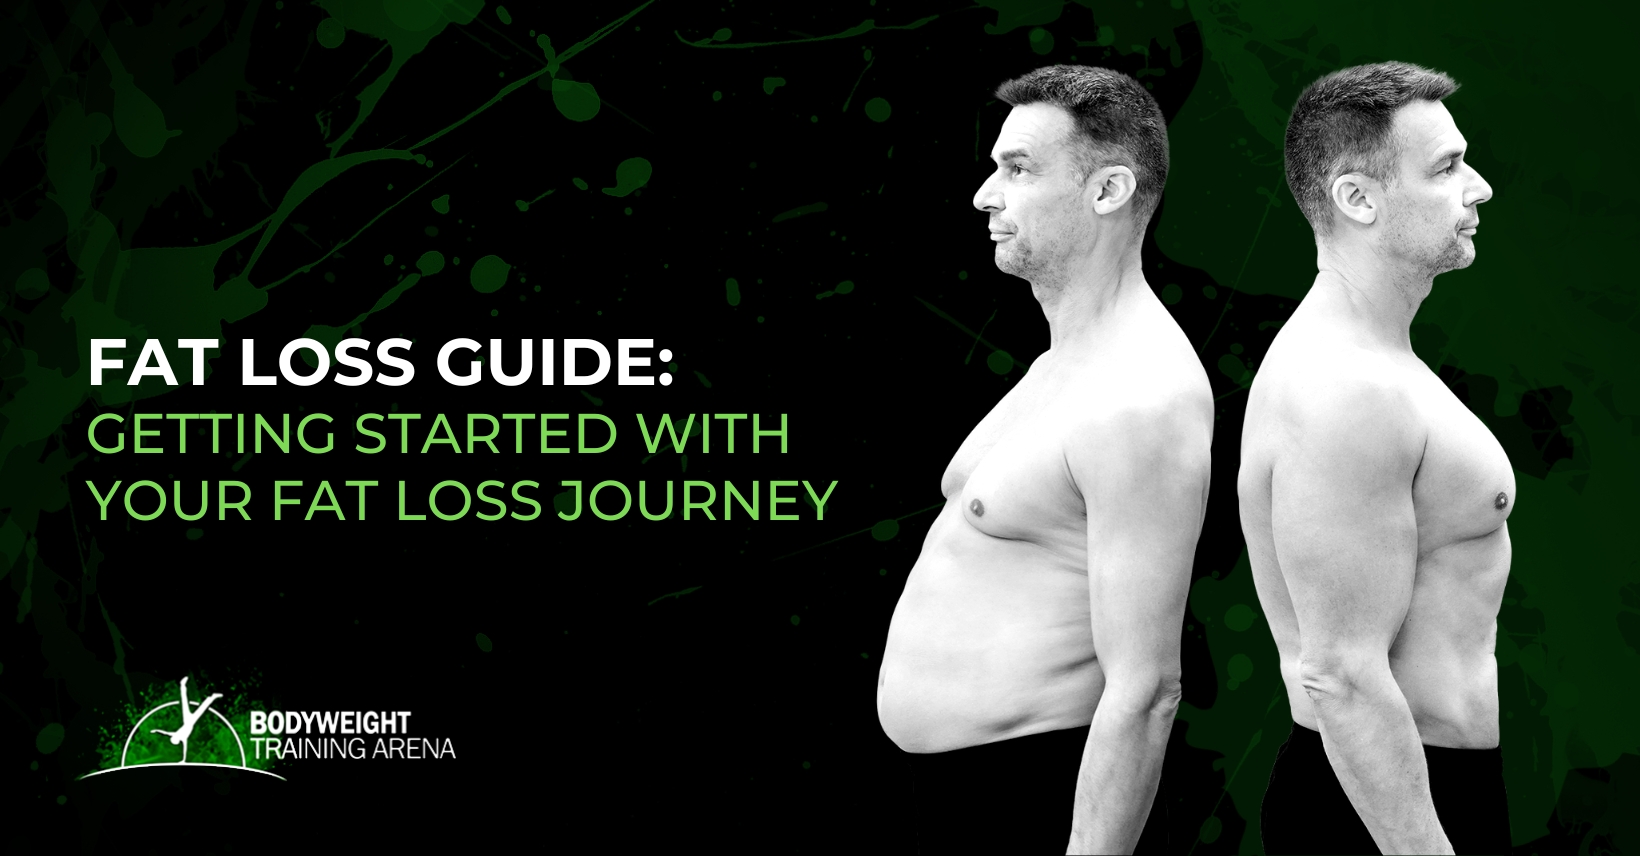 Fat Loss Guide: Getting started with your fat loss journey